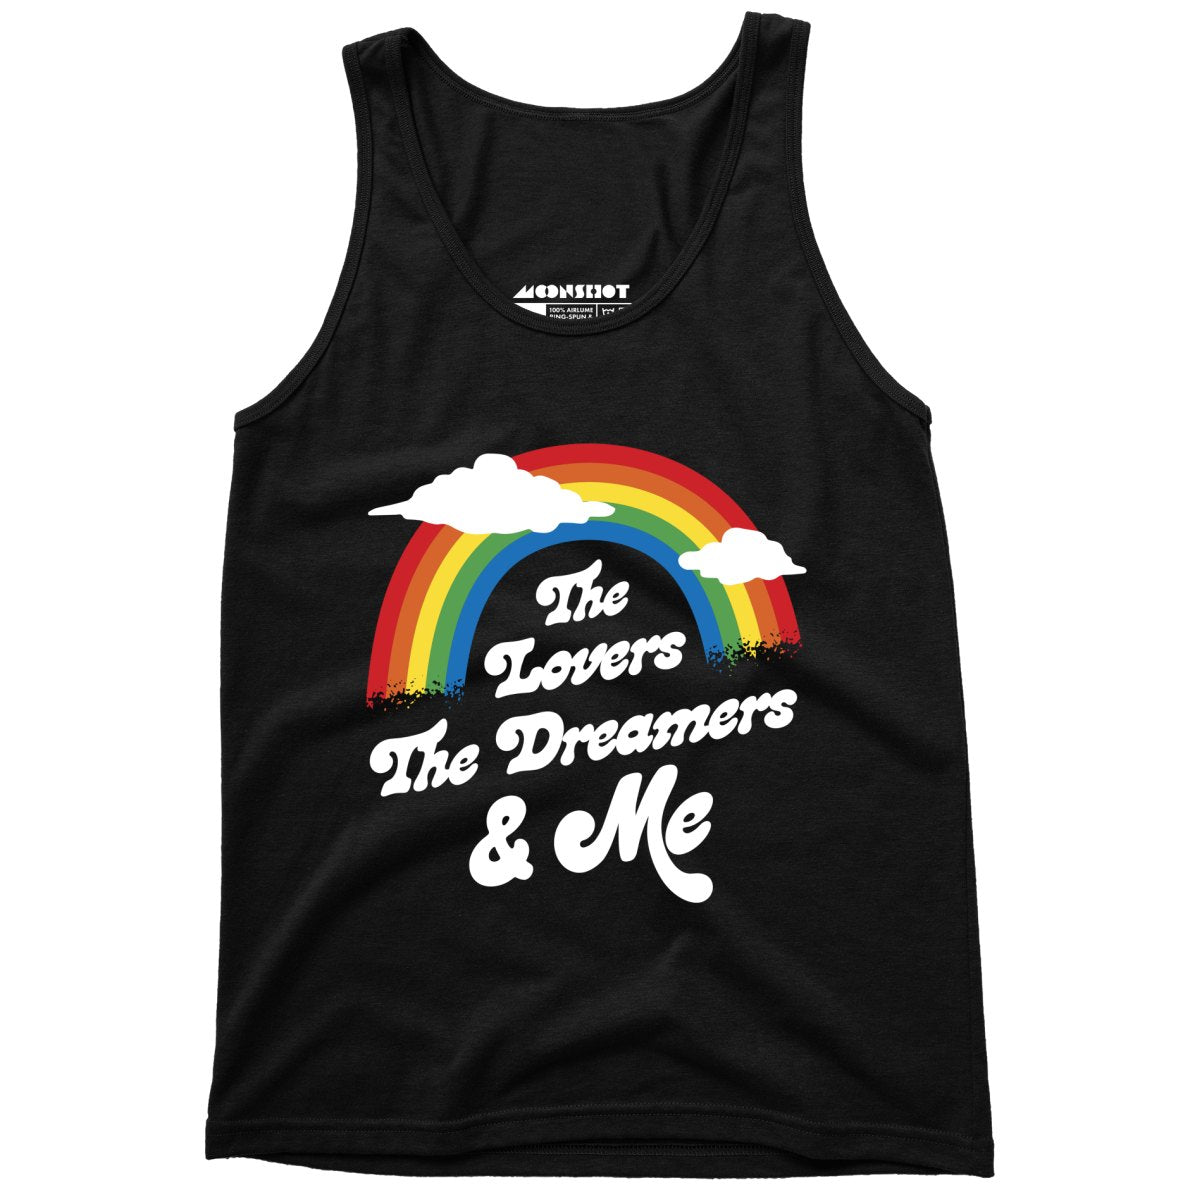 The Lovers The Dreamers & Me - Unisex Tank Top